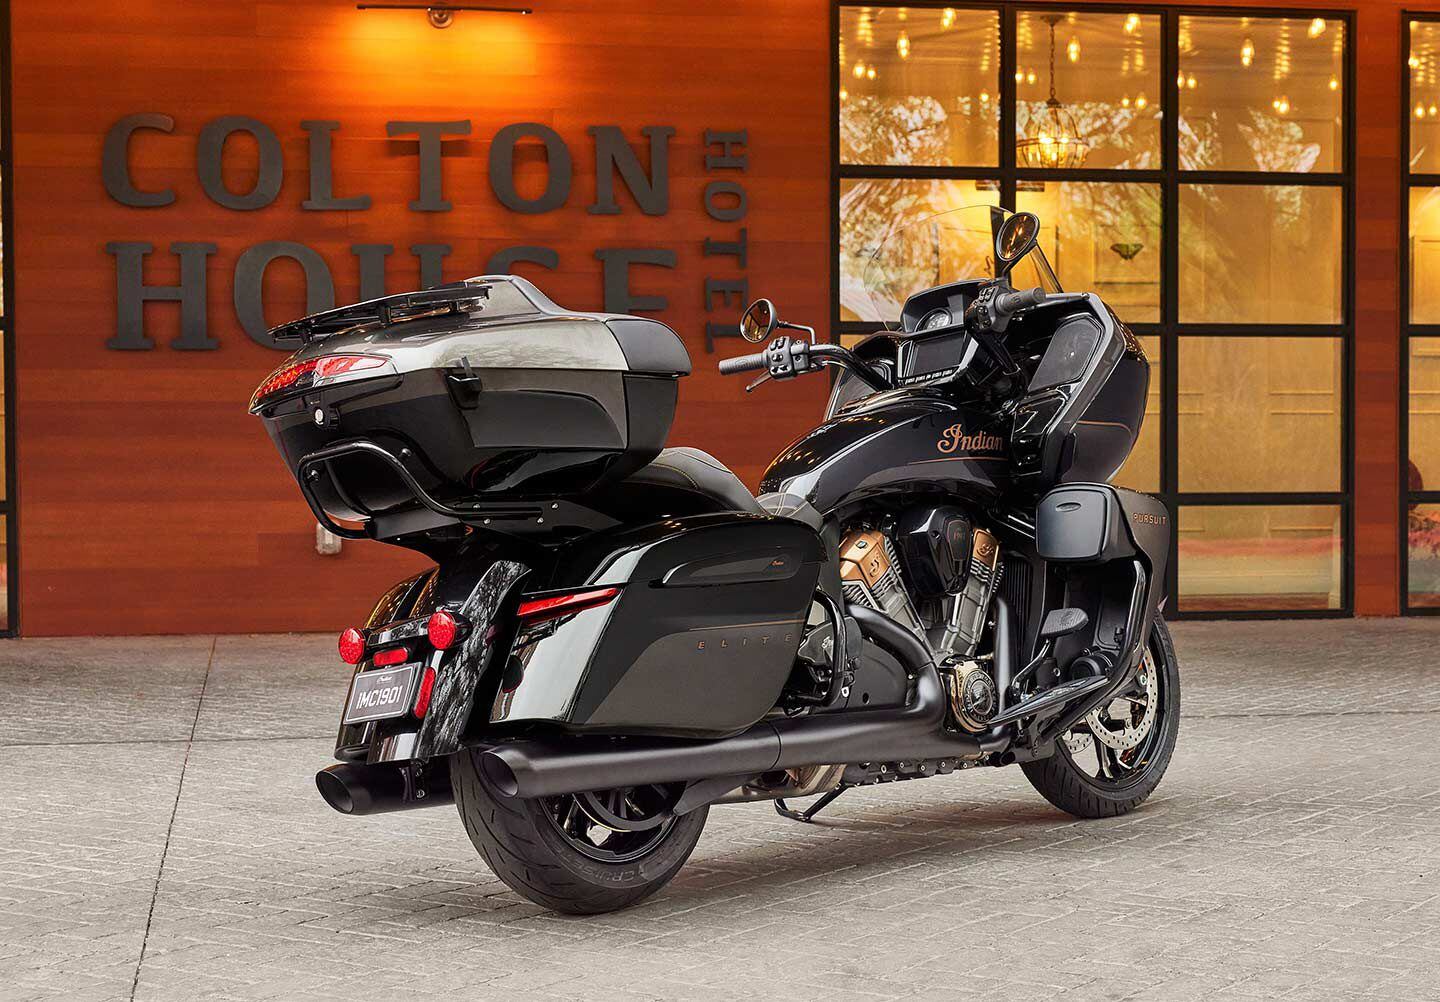 As on the base model, you get a cargo trunk and top-loading weatherproof saddlebags, good for more than 35 gallons of storage in total. Luggage is also remote-locking.